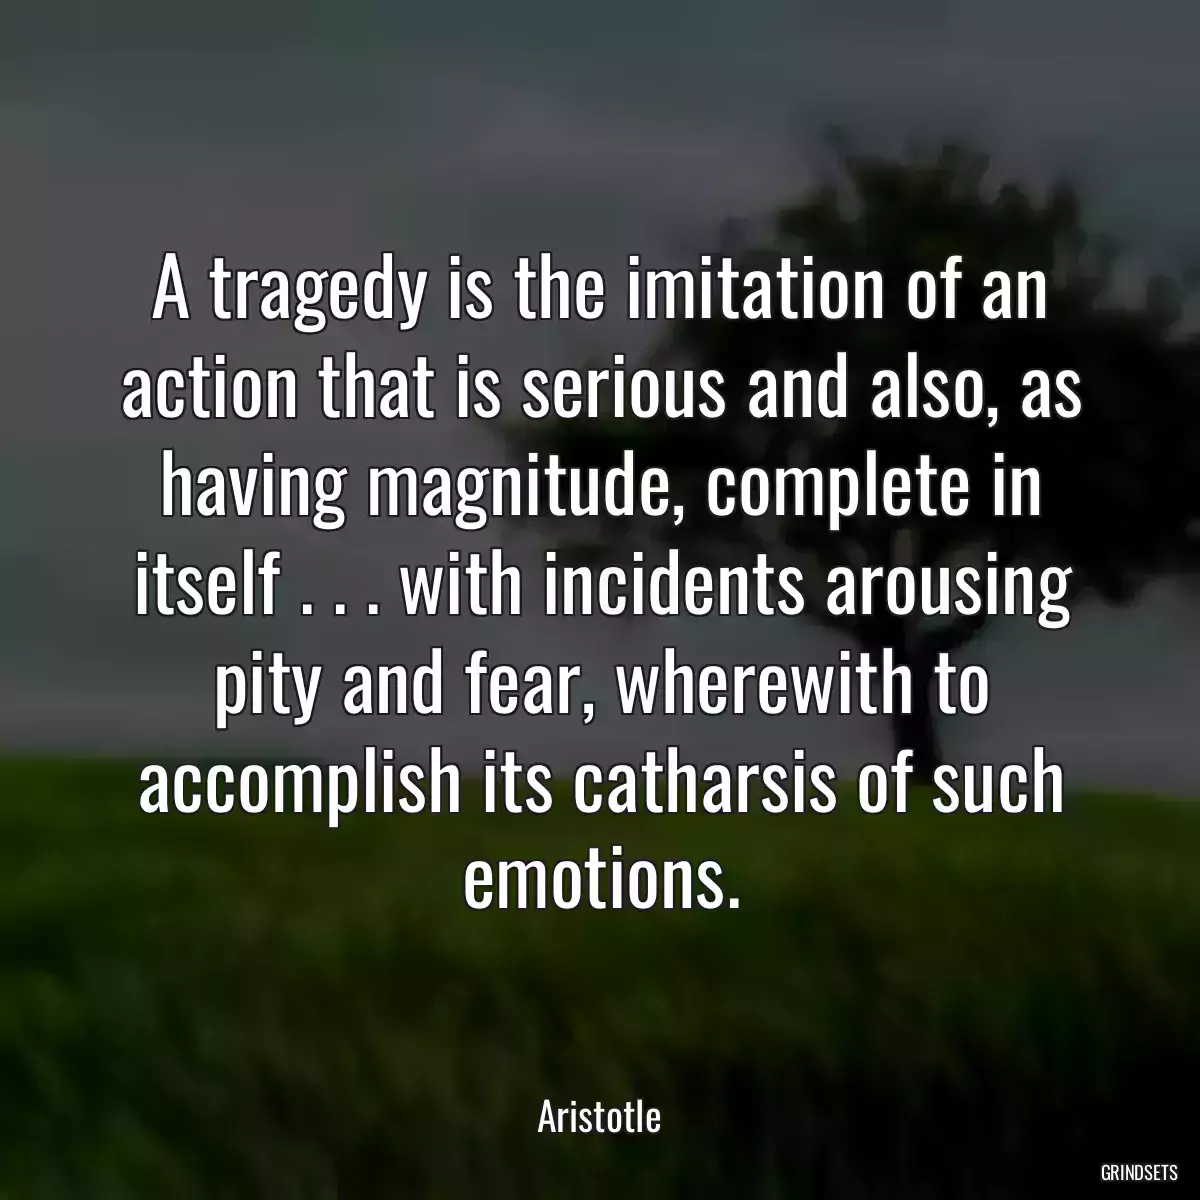 A tragedy is the imitation of an action that is serious and also, as having magnitude, complete in itself . . . with incidents arousing pity and fear, wherewith to accomplish its catharsis of such emotions.